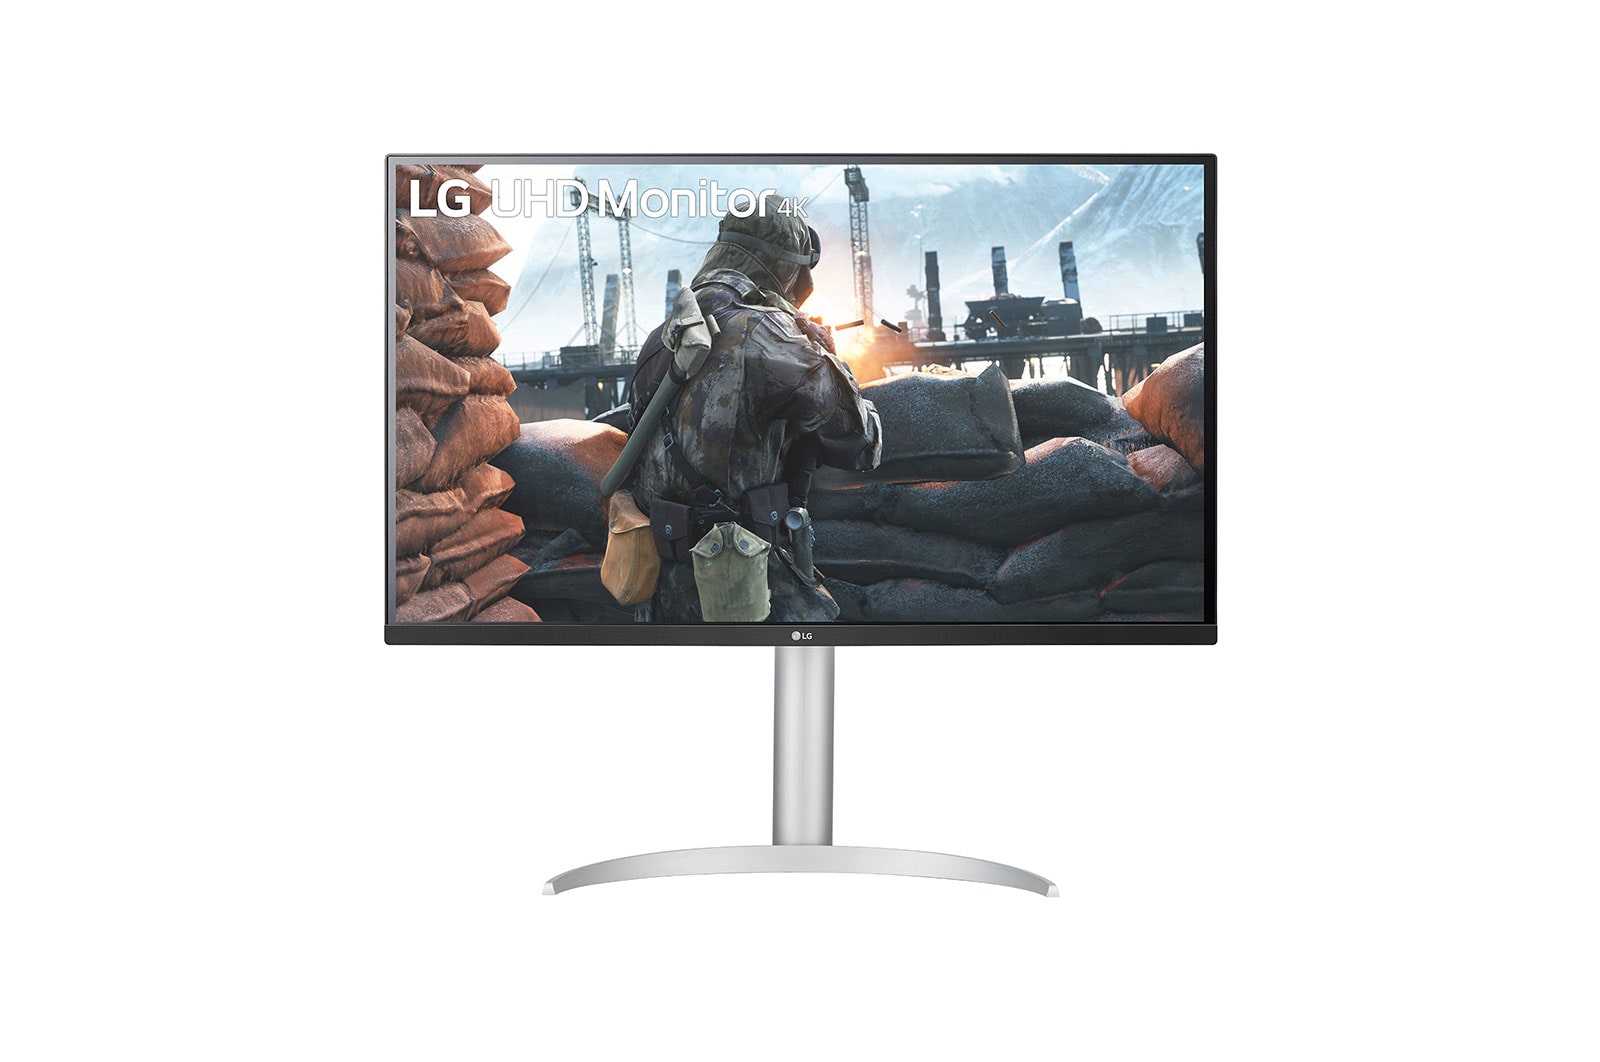 32-inch Ultrafine HDR Monitor - 32UP83A-W